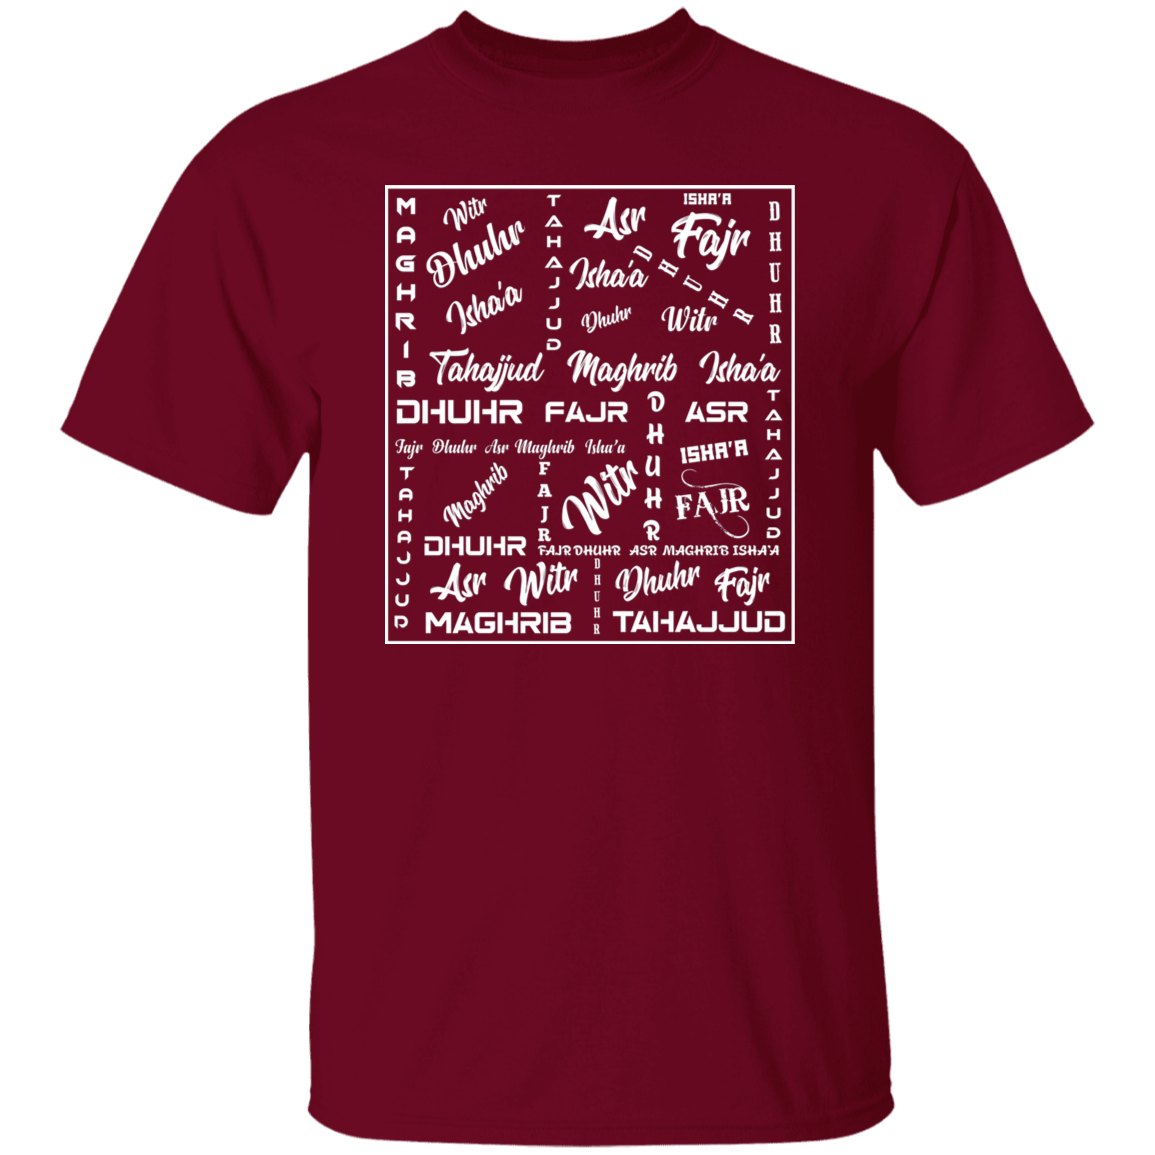 PRAYERS IN A SQUARE LOGO T-Shirt (MORE COLOR OPTIONS)